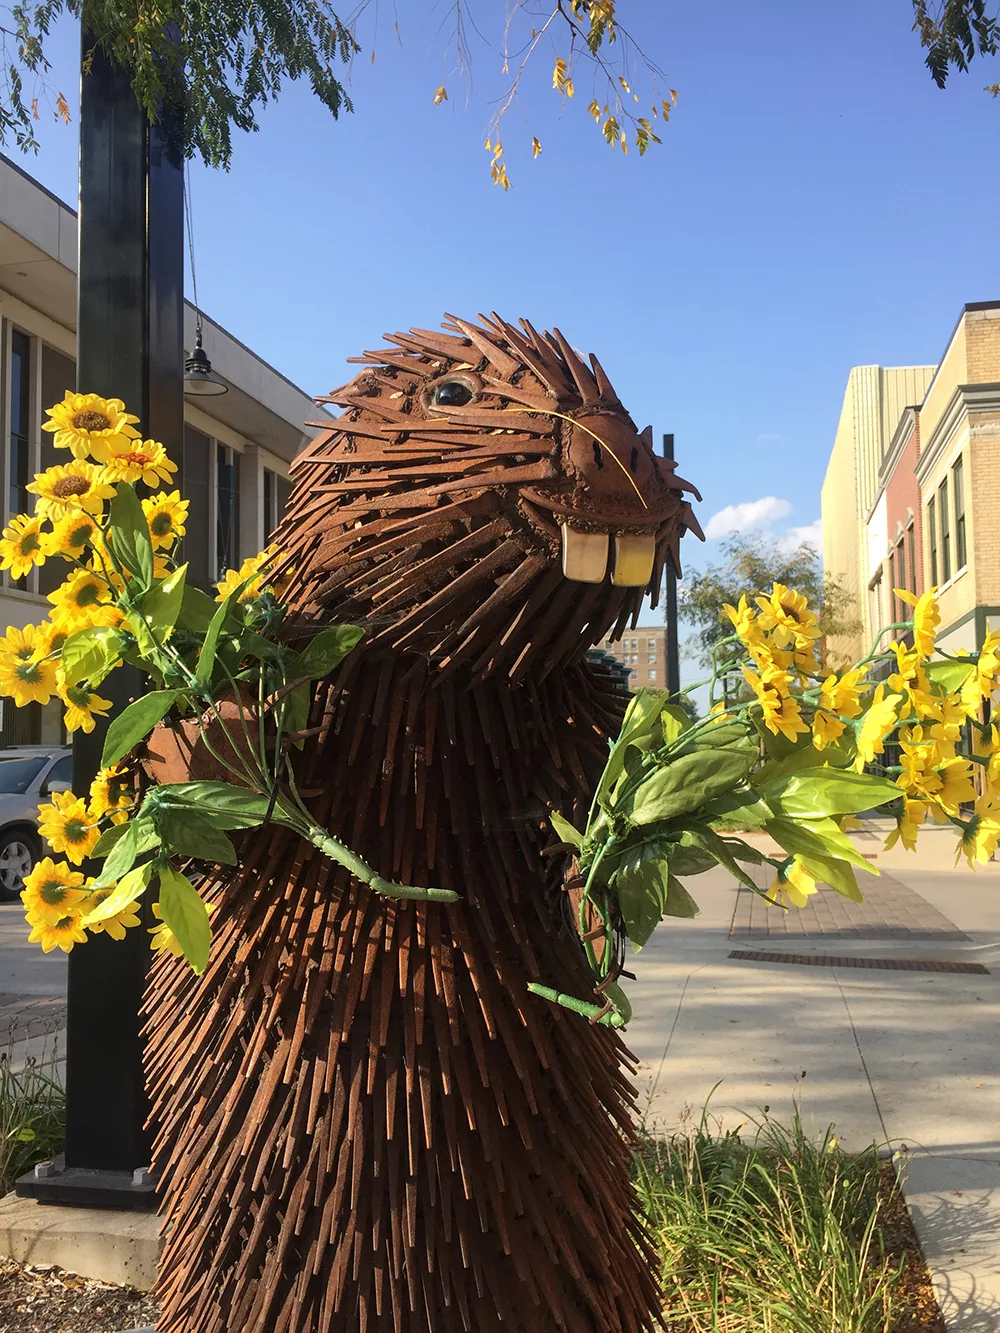 Sculpture of beaver holding bunches of yellow flowers on the River City Sculptures on Parade in Mason City, Iowa